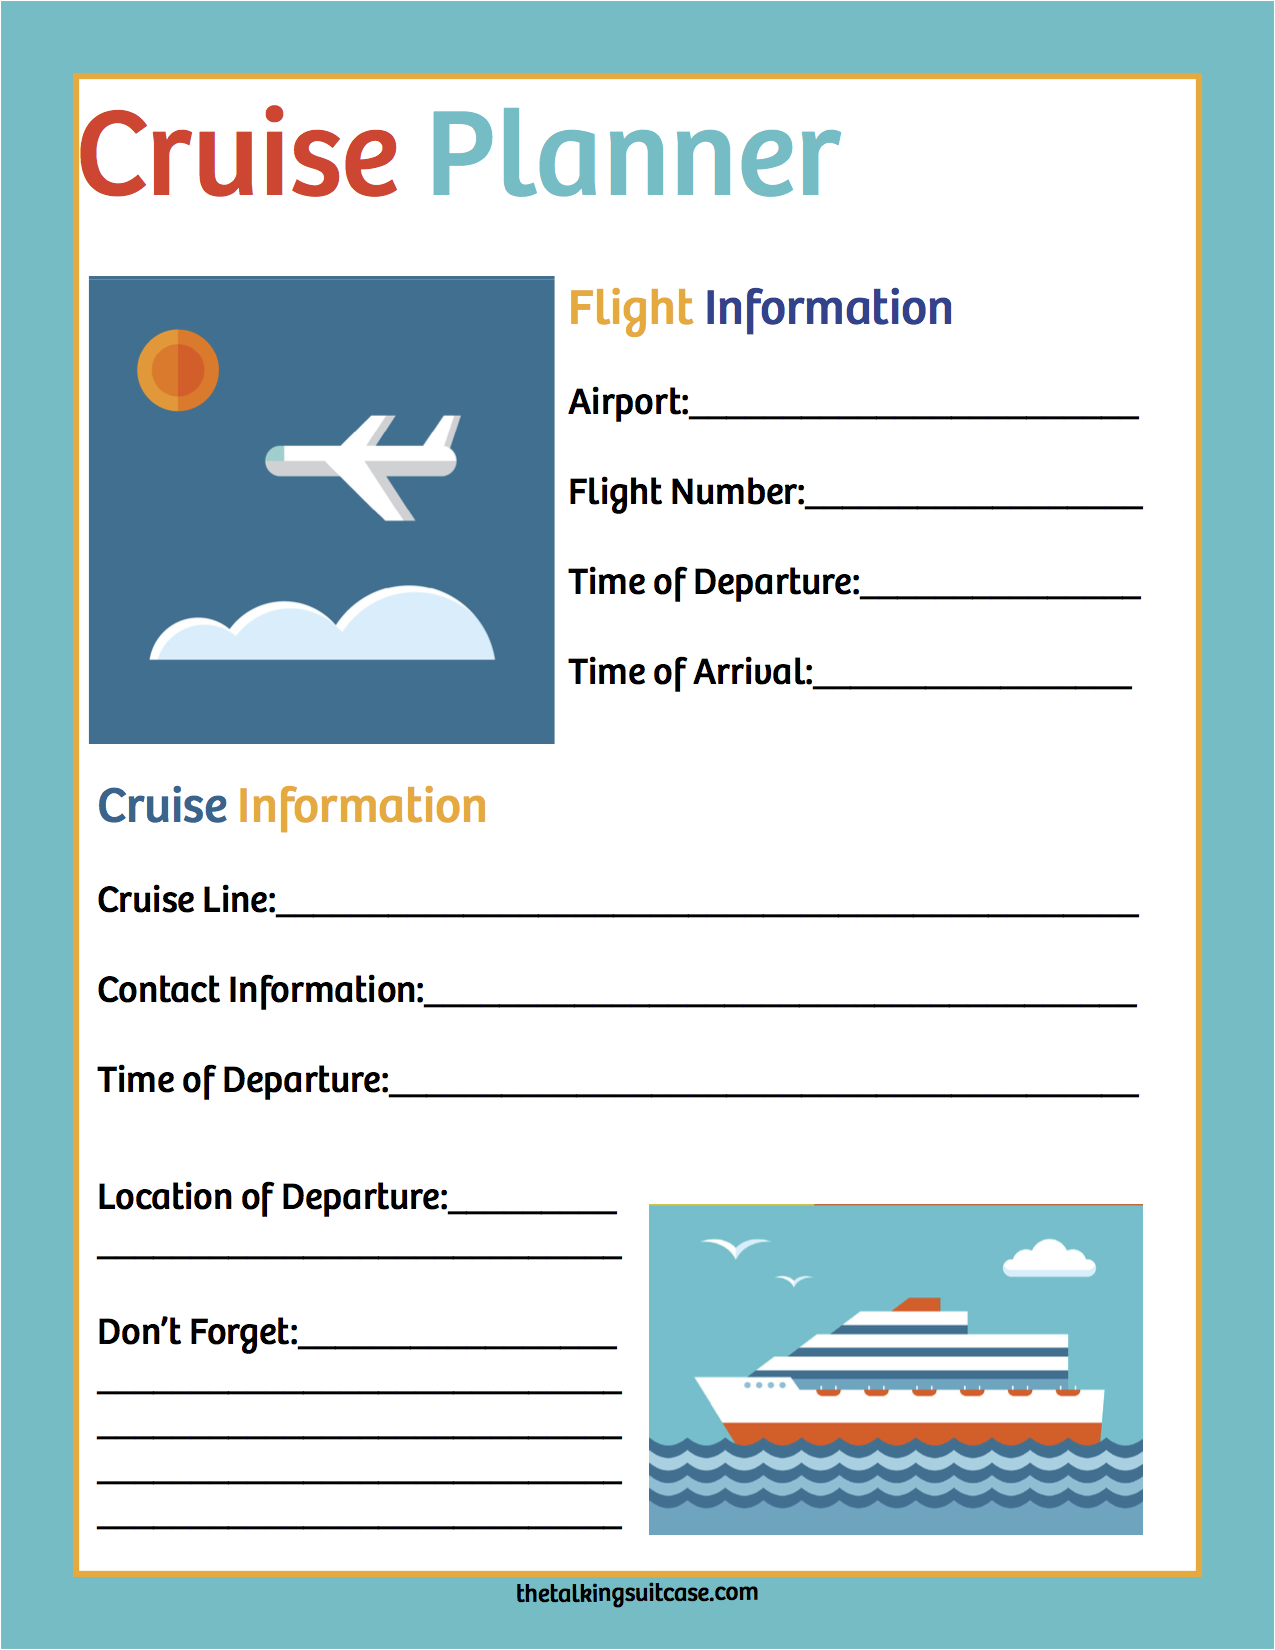 how to print carnival cruise itinerary